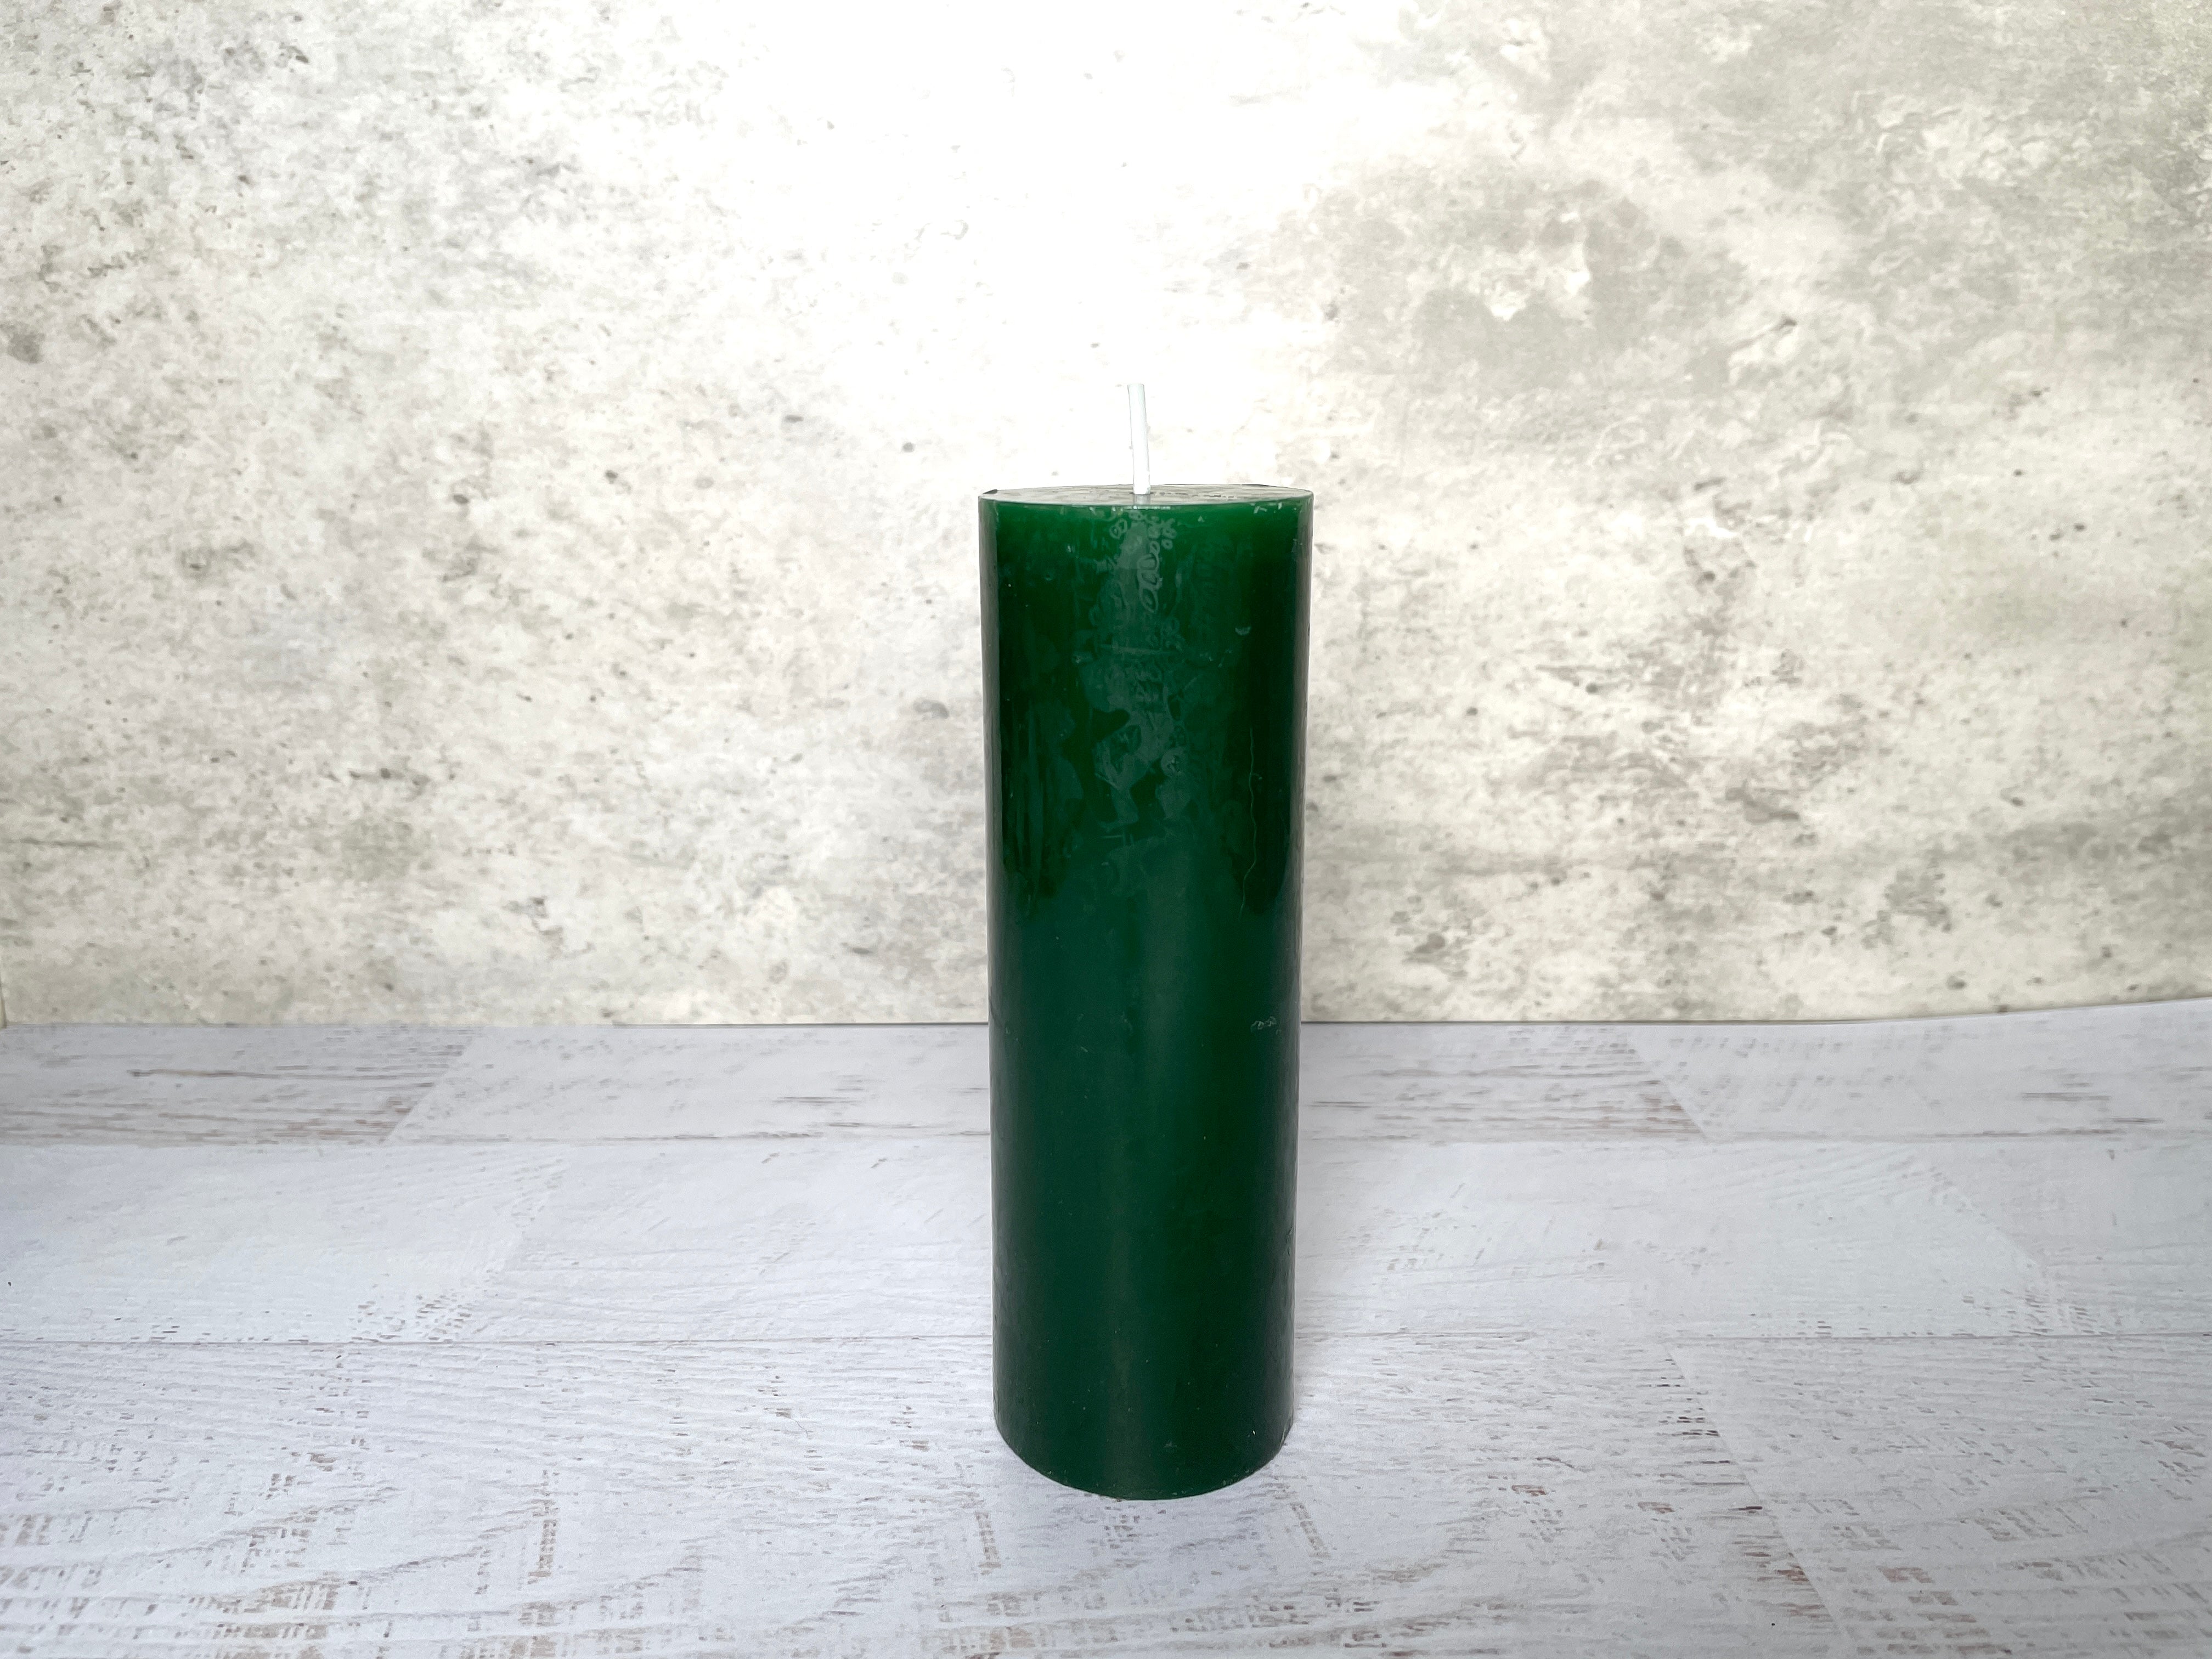 Buy Online Latest and Unique Green Pillar Candle 2" x 6" Inch, Prosperity, Money, Abundance Wealth, Luck | Shop Best Spiritual Items - The Mystical Ritual